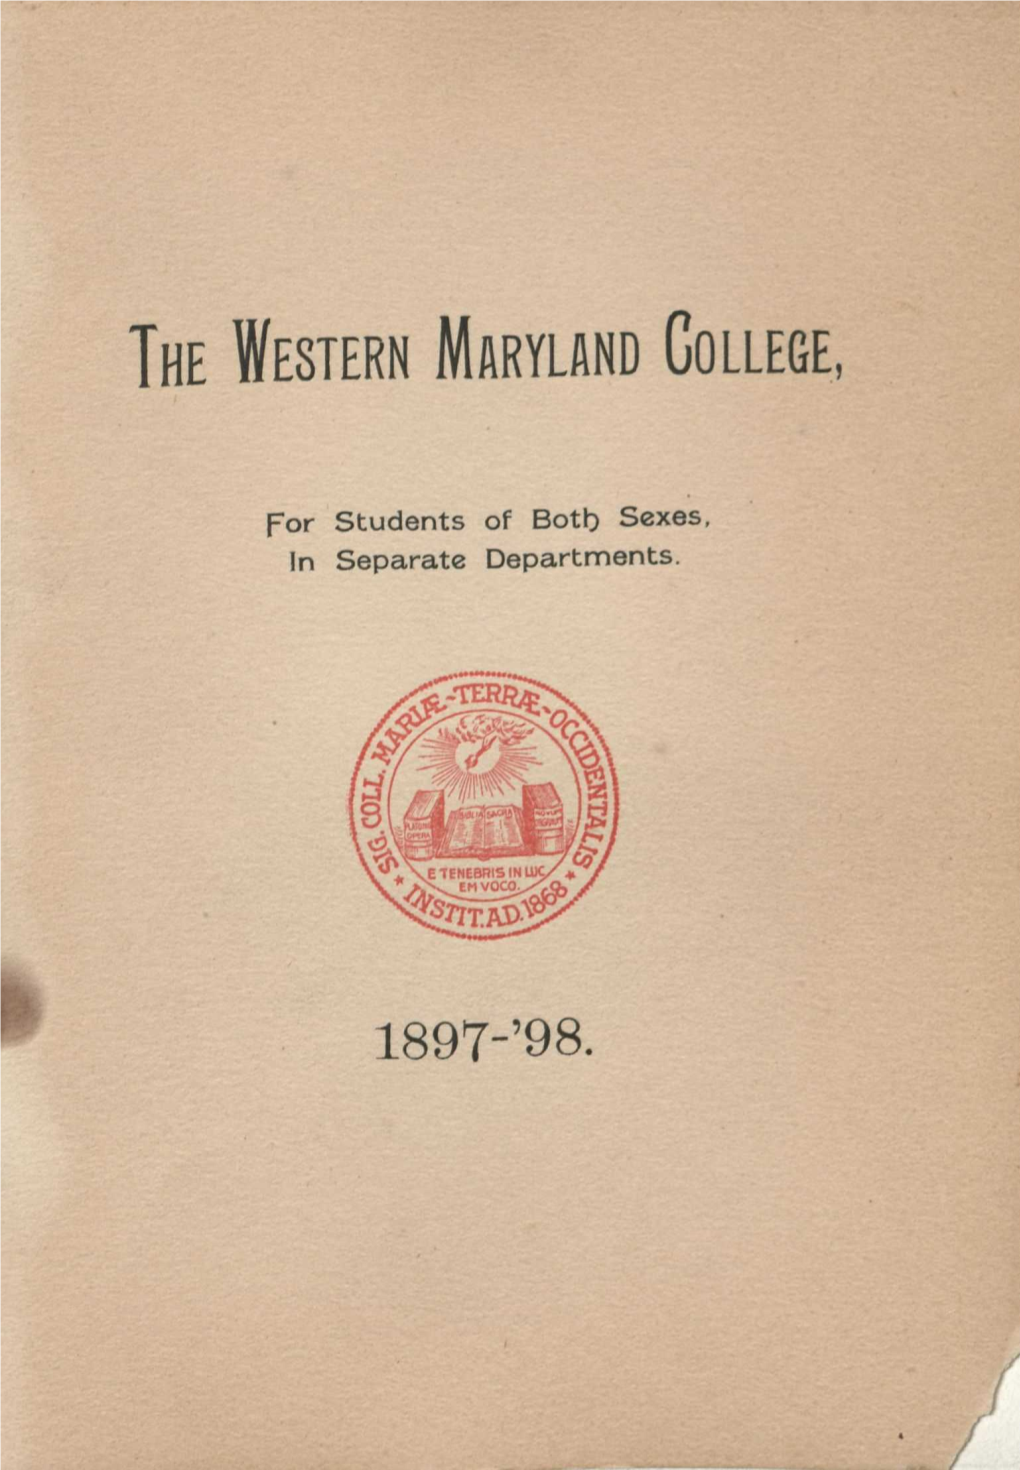 The Western Maryland College